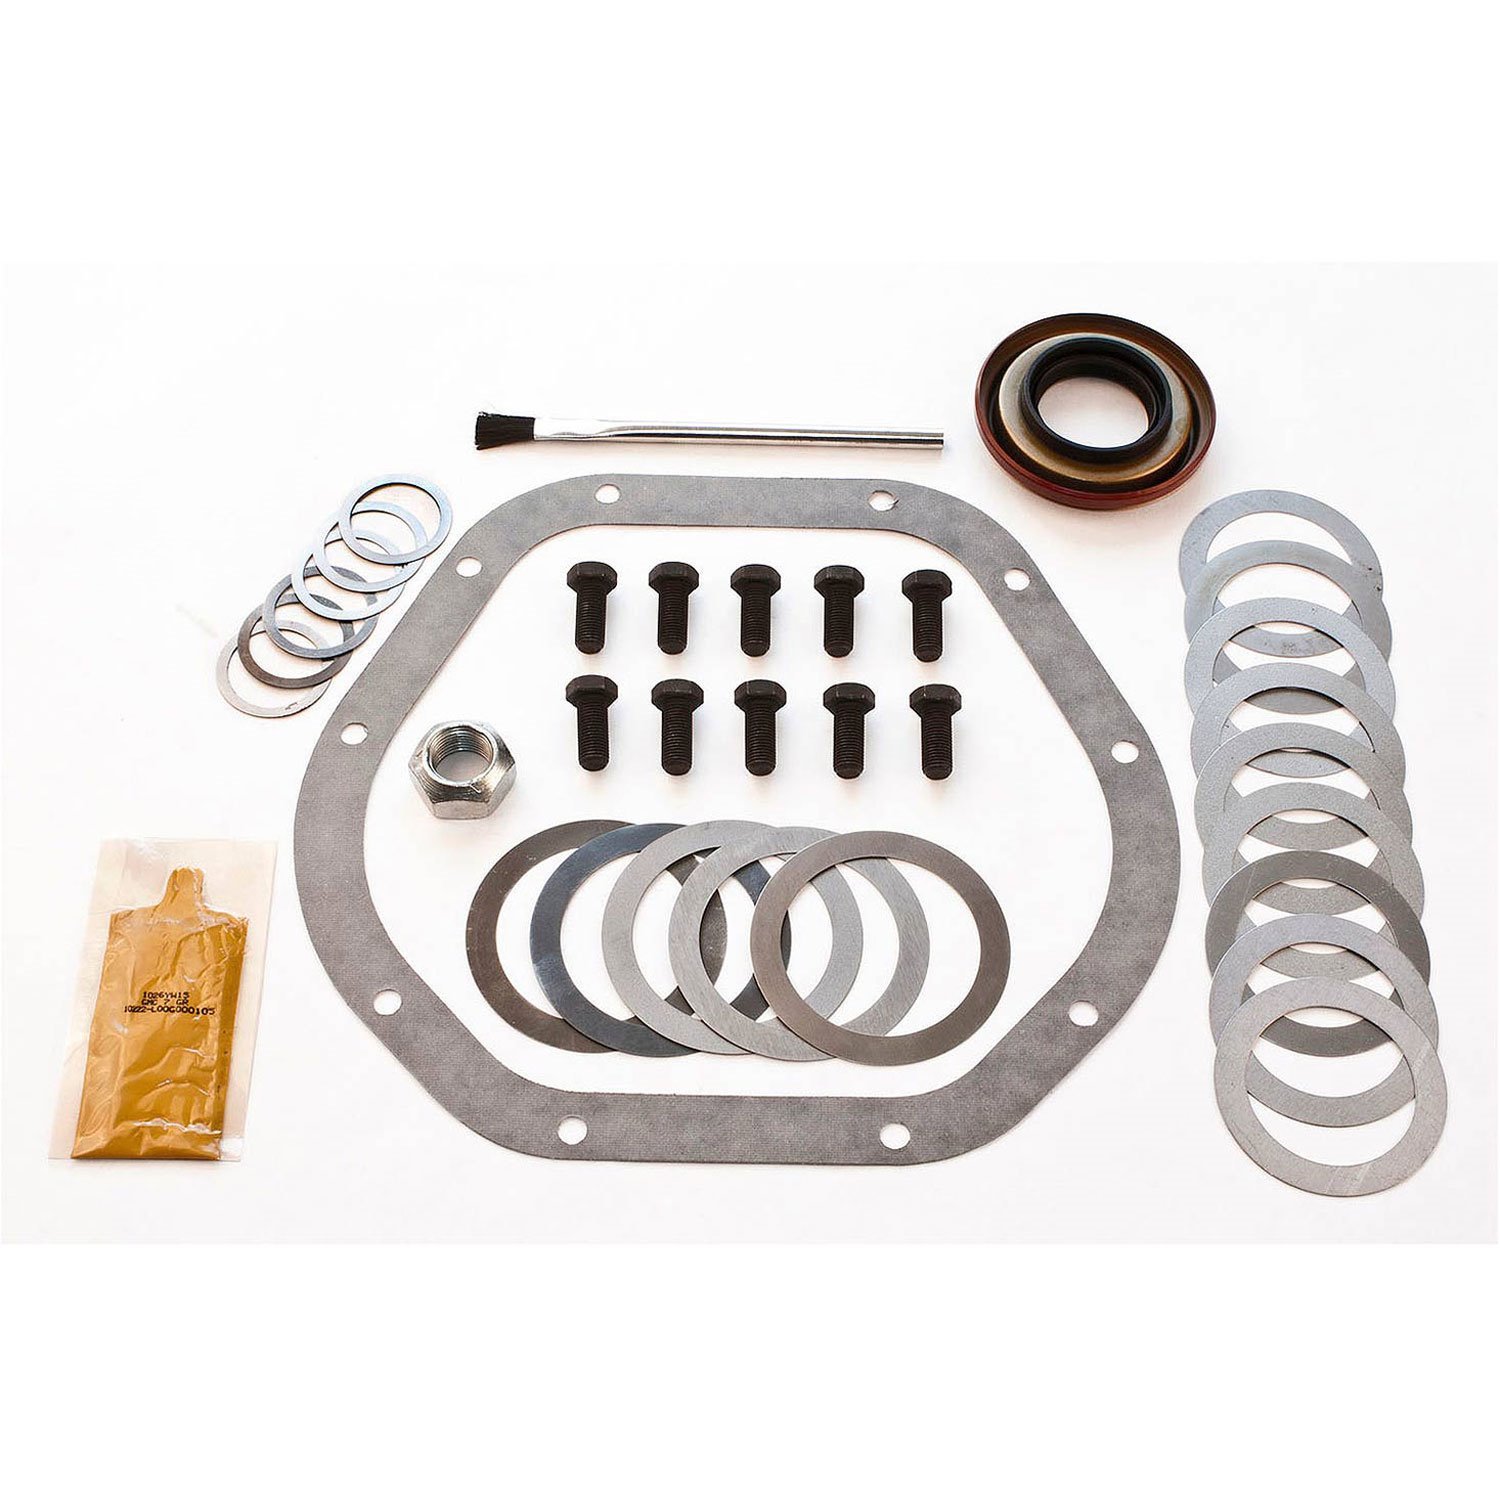 D44IK Ring and Pinion Installation Kit For Dana 44